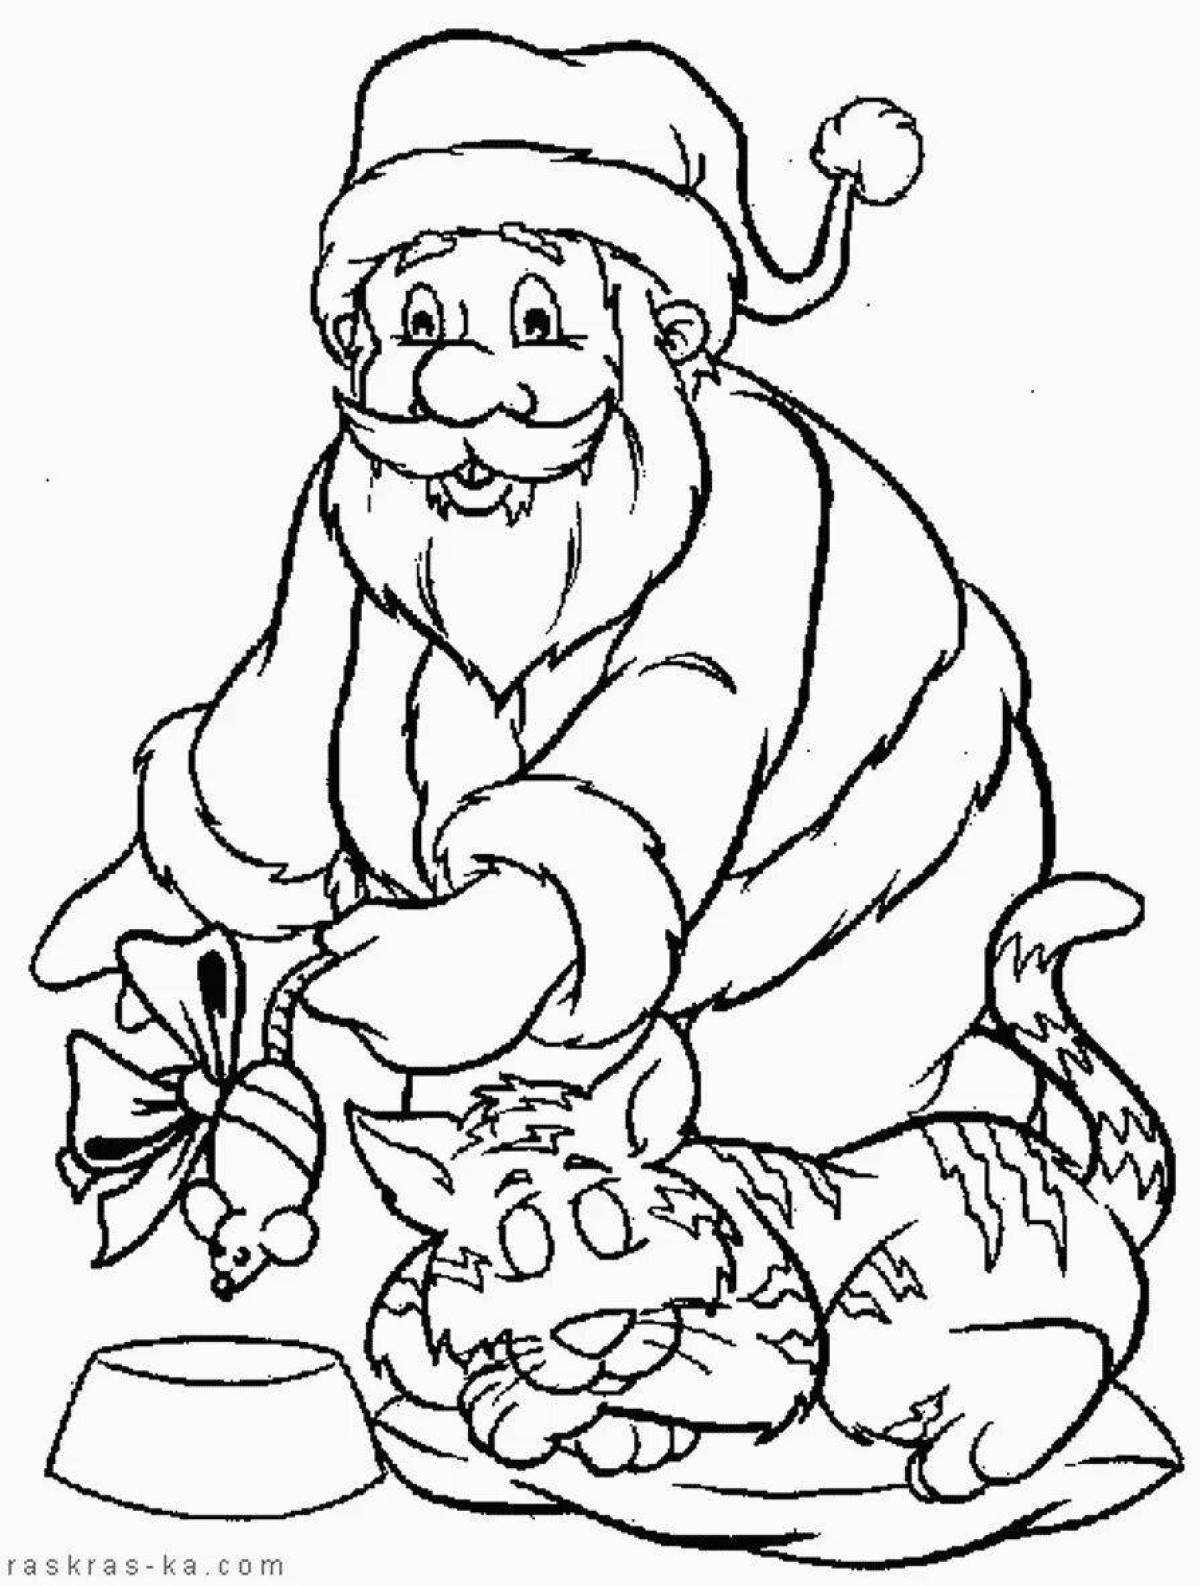 Coloring page magic cat in a hat